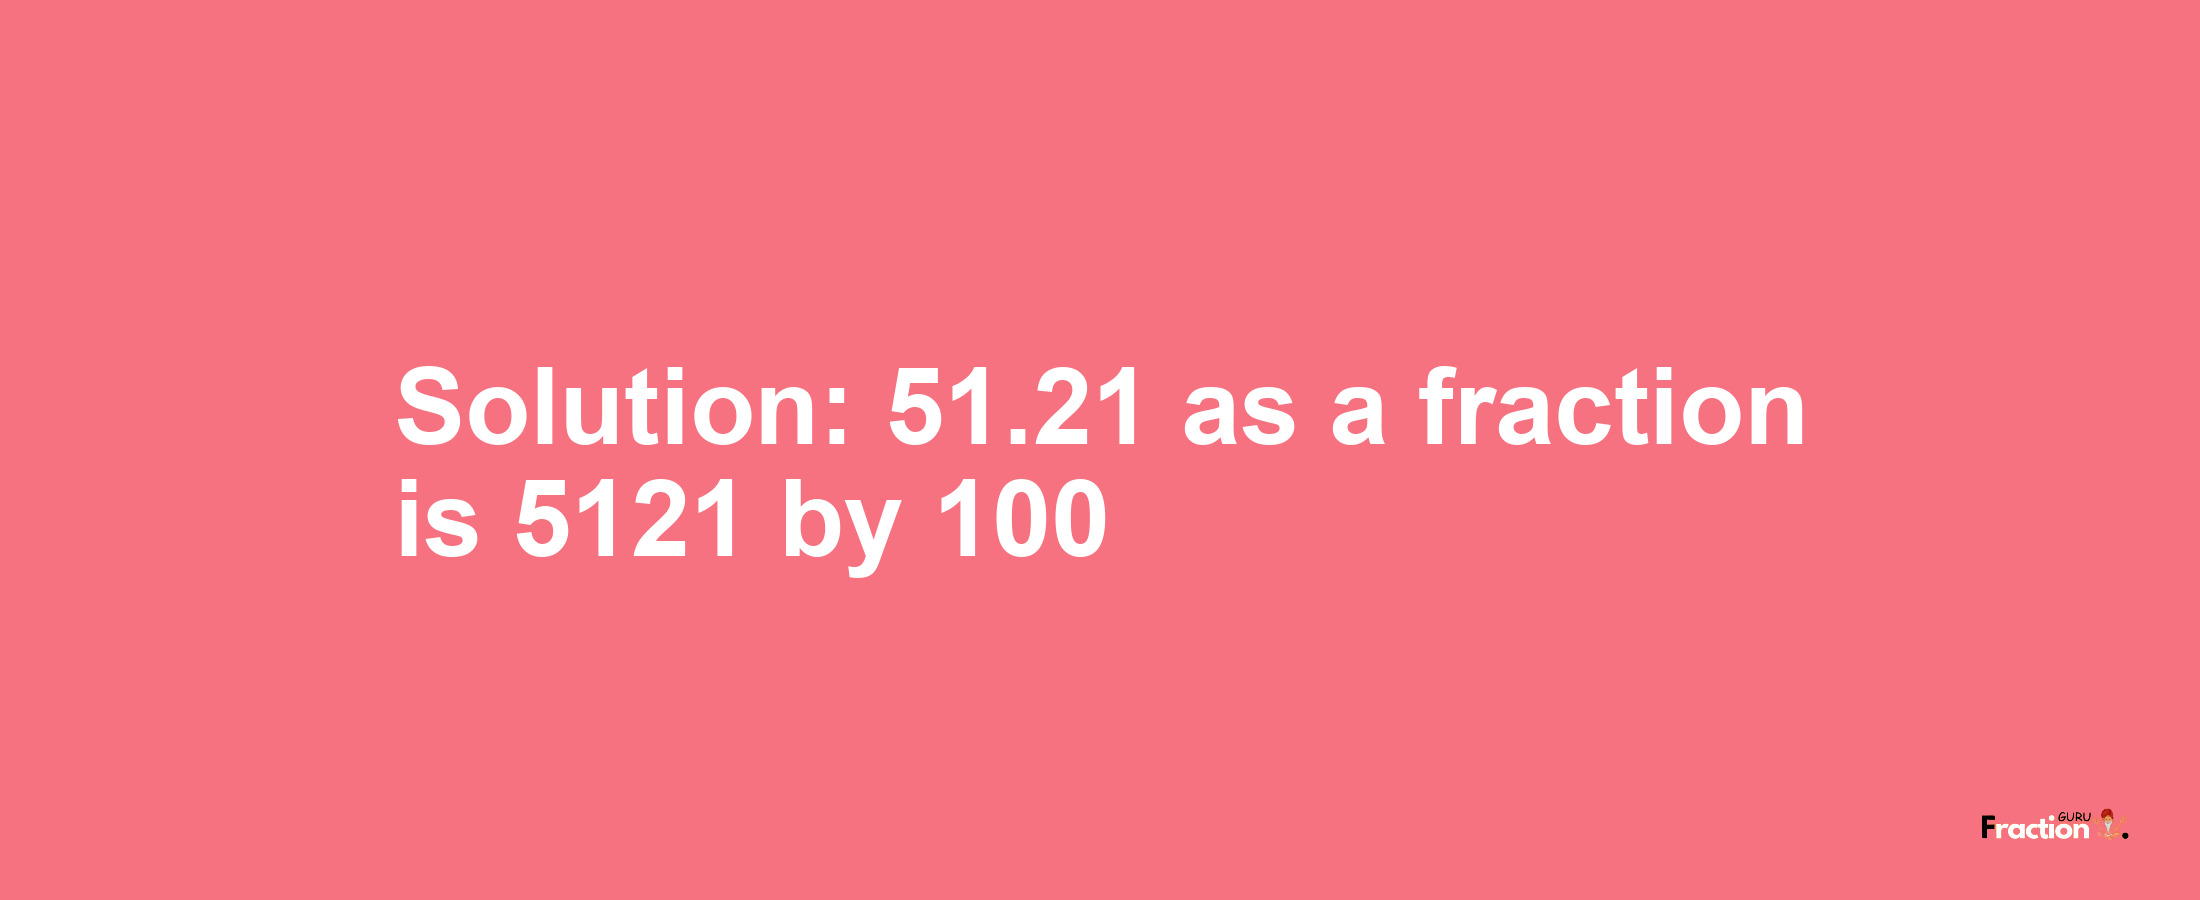 Solution:51.21 as a fraction is 5121/100